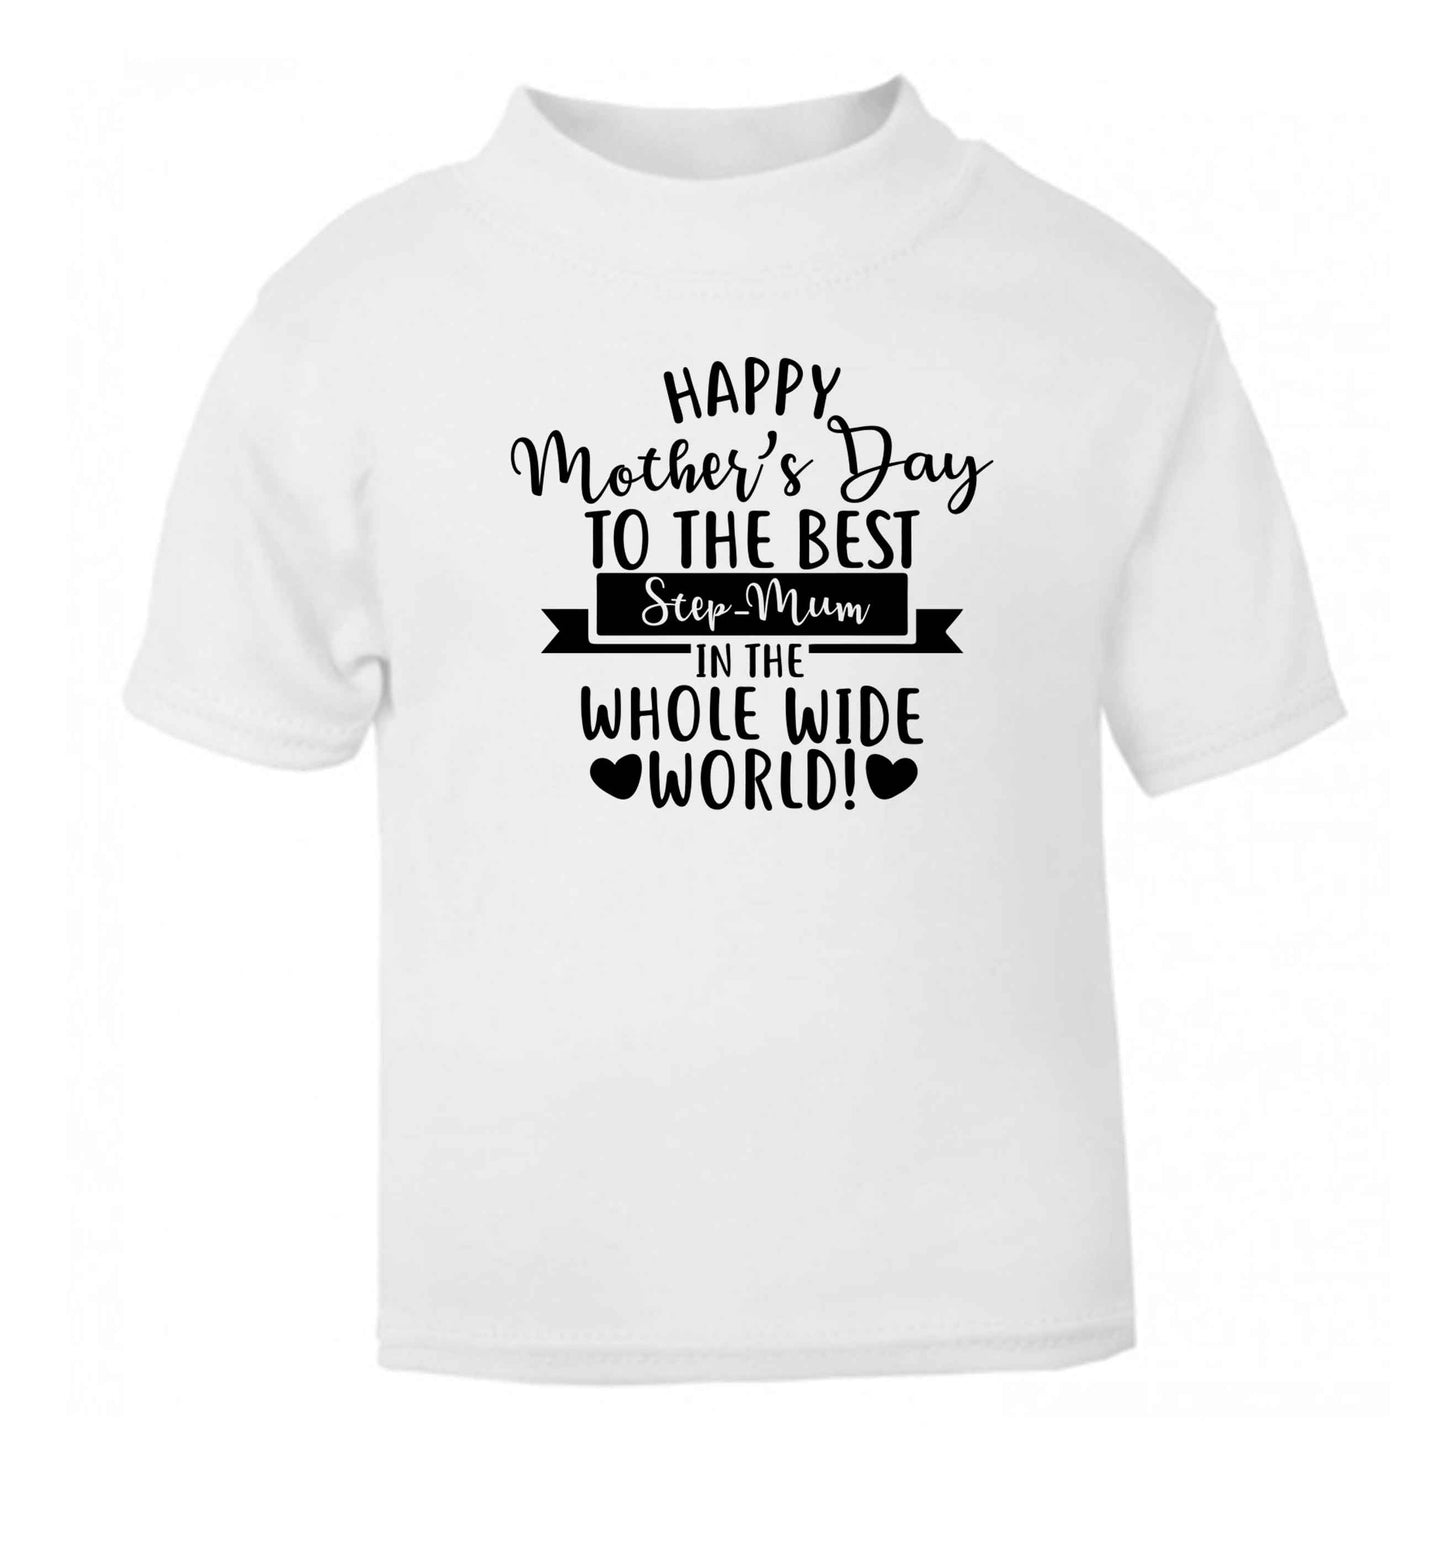 Happy mother's day to the best step-mum in the world white baby toddler Tshirt 2 Years